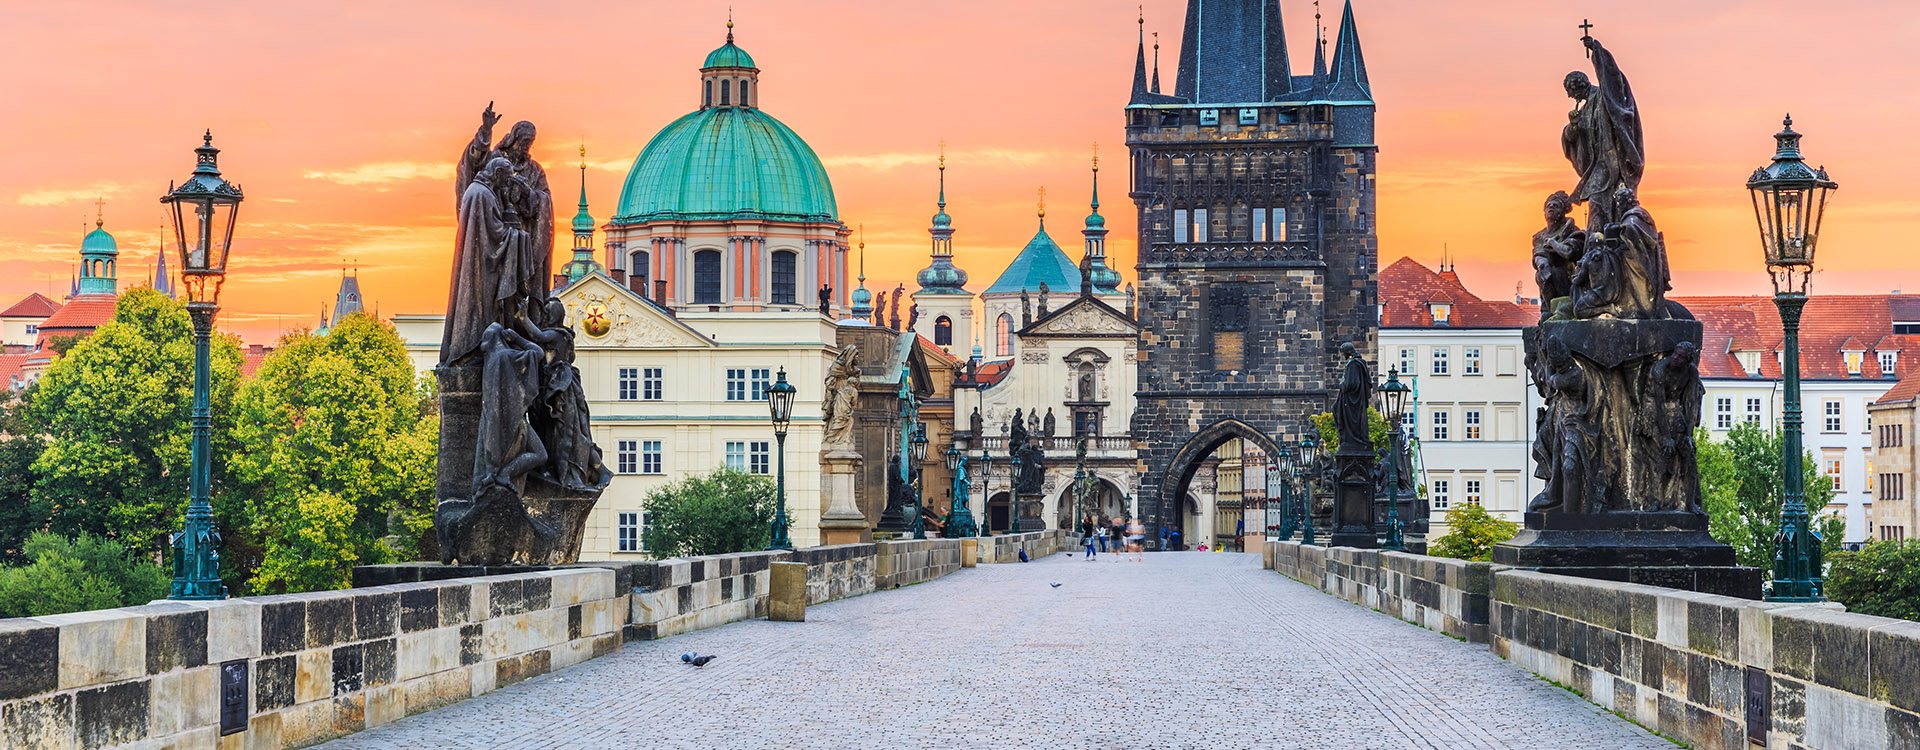 Charles Bridge (Karluv Most) and Old Town Tower, Czech Republic.